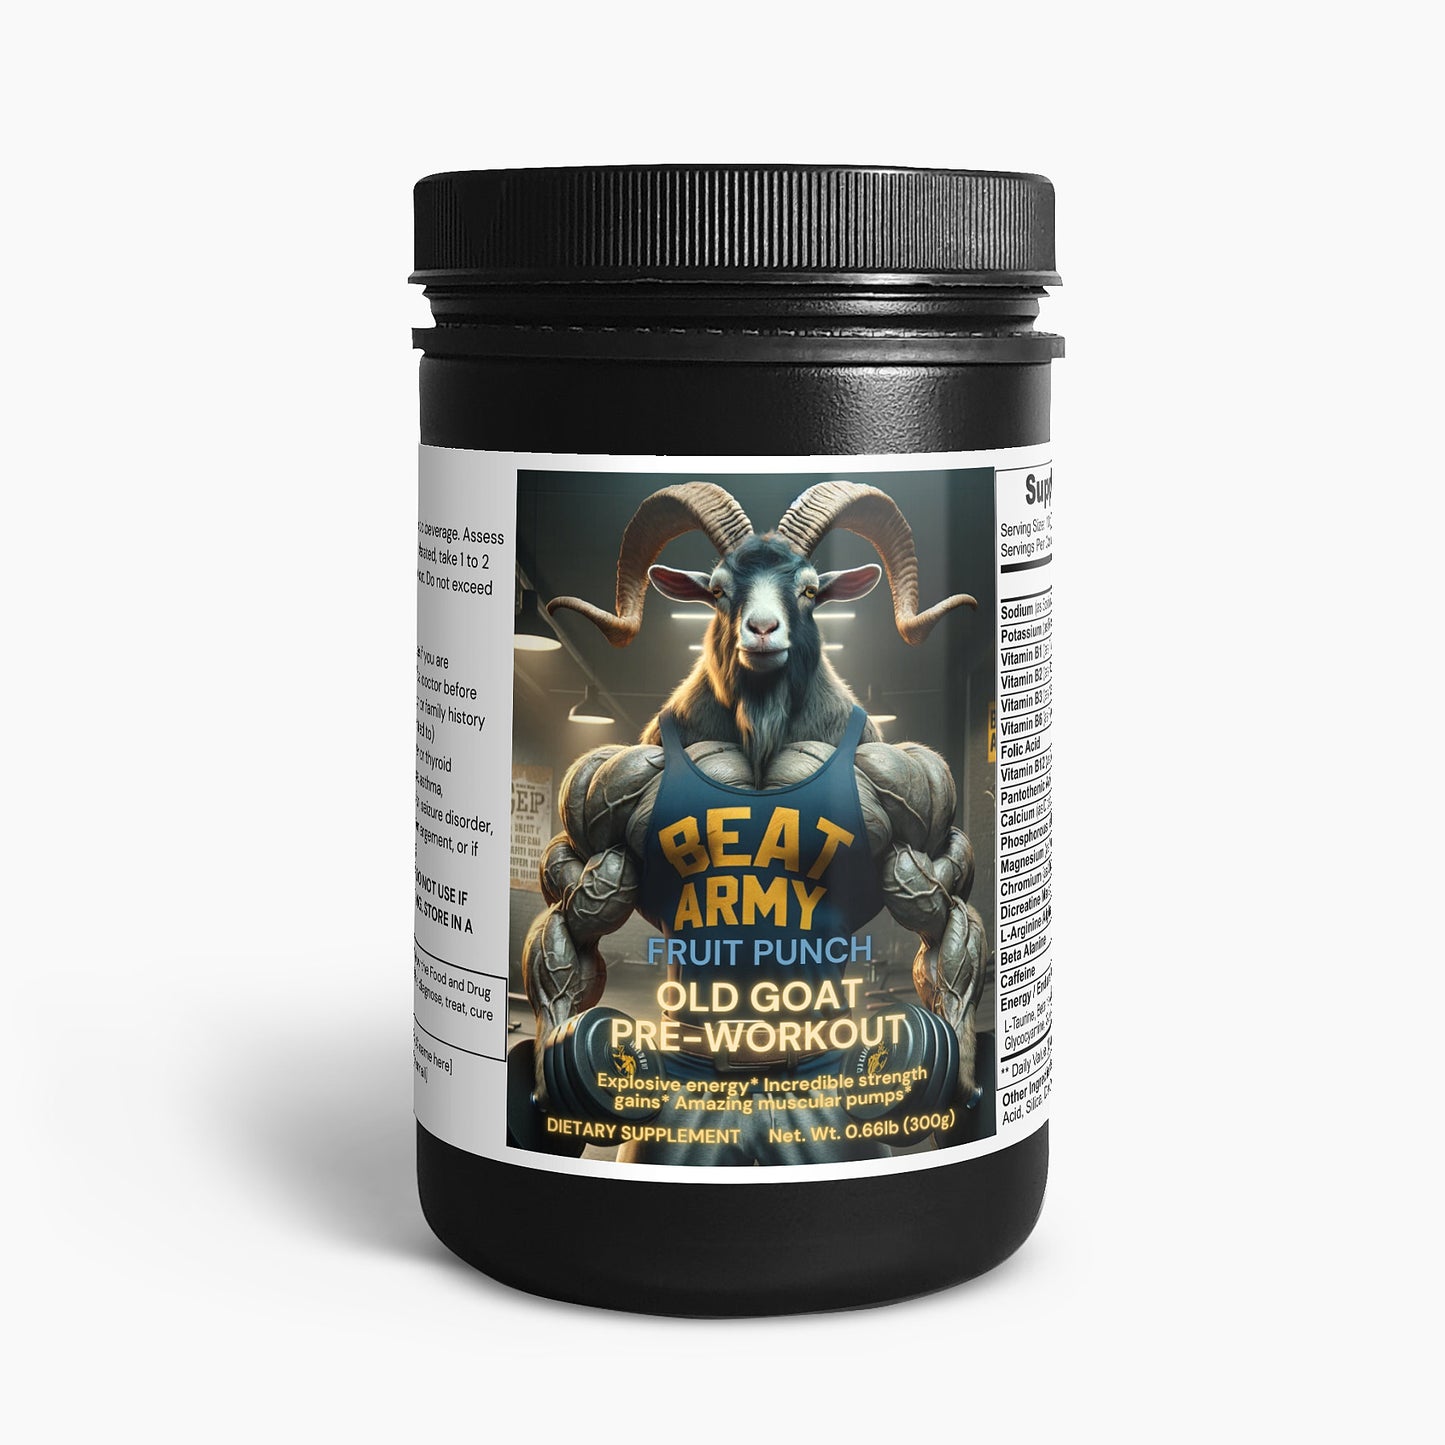 Old Goat Pre-Workout Powder (Fruit Punch)